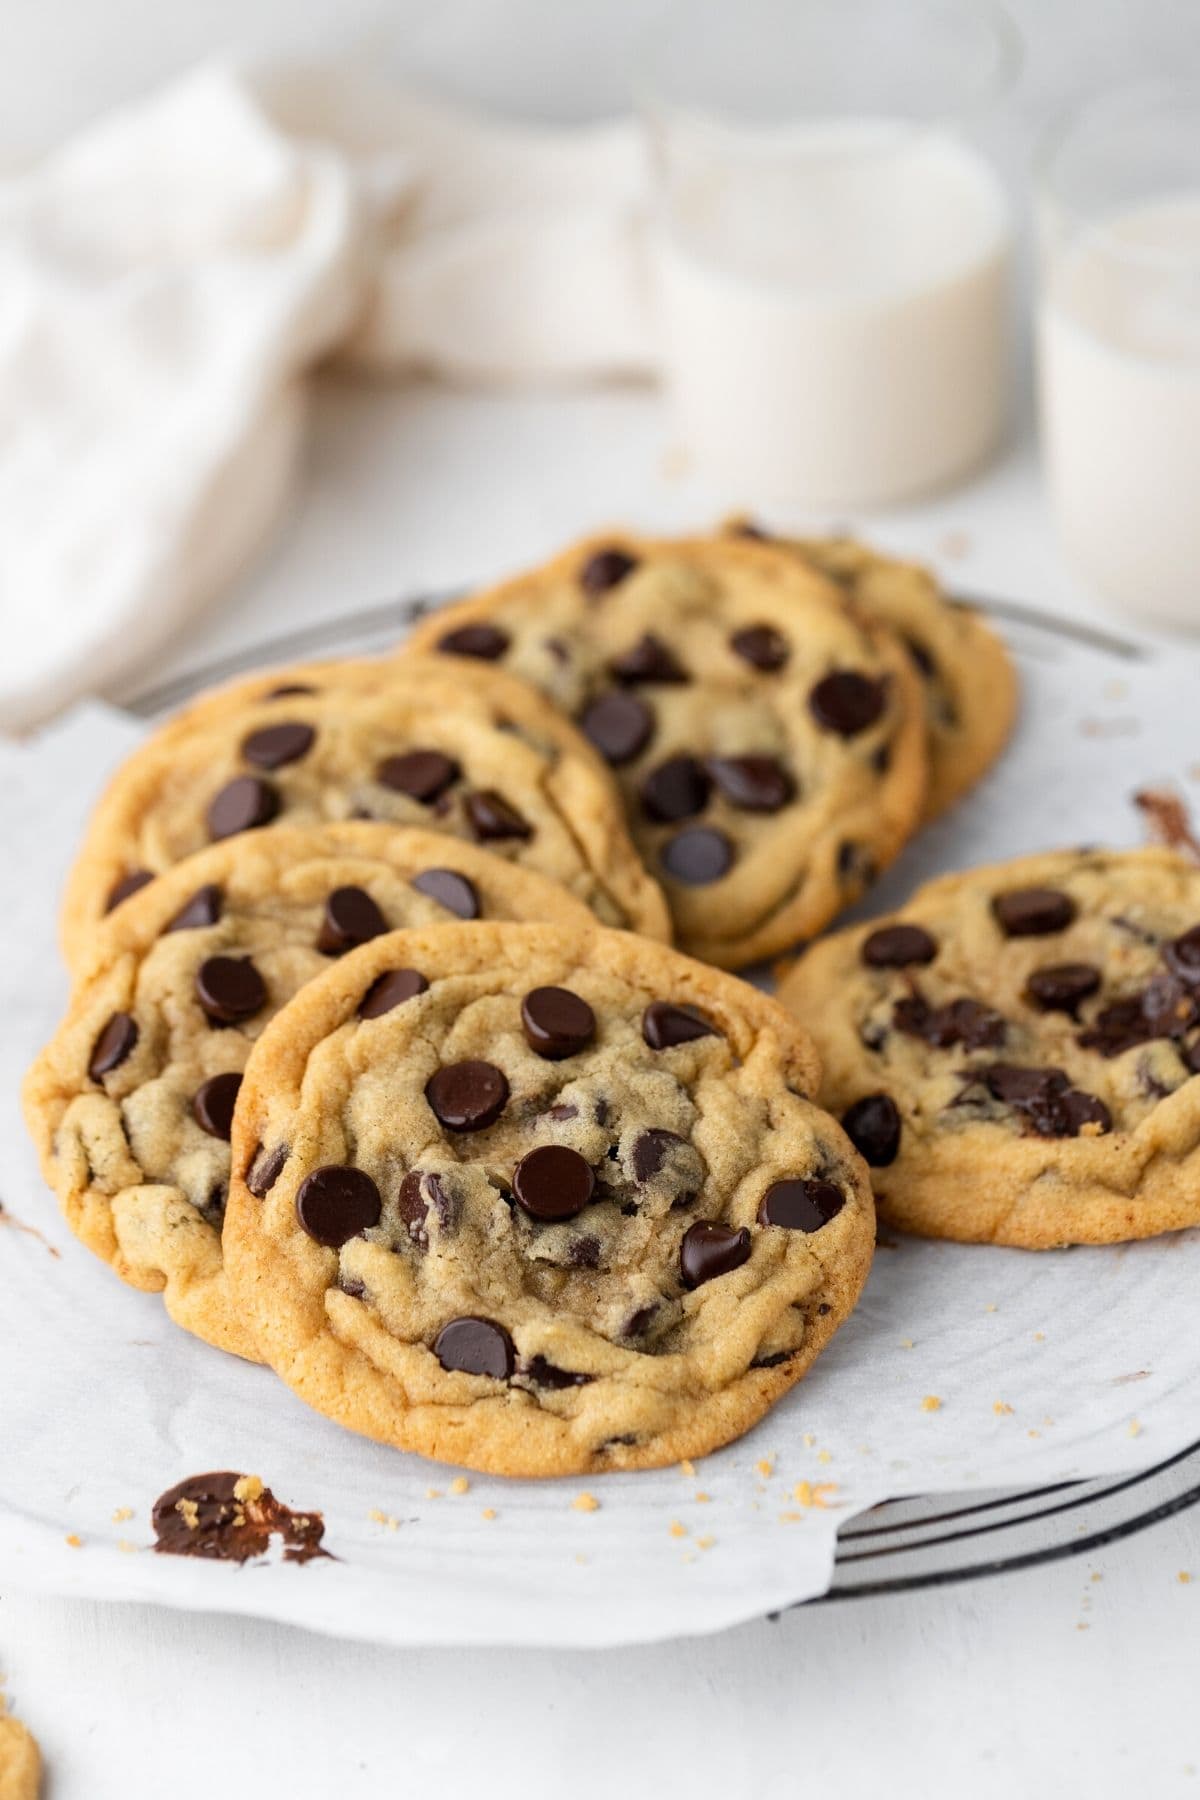 Bakery Style Chocolate Chip Cookies arranged on serving platter